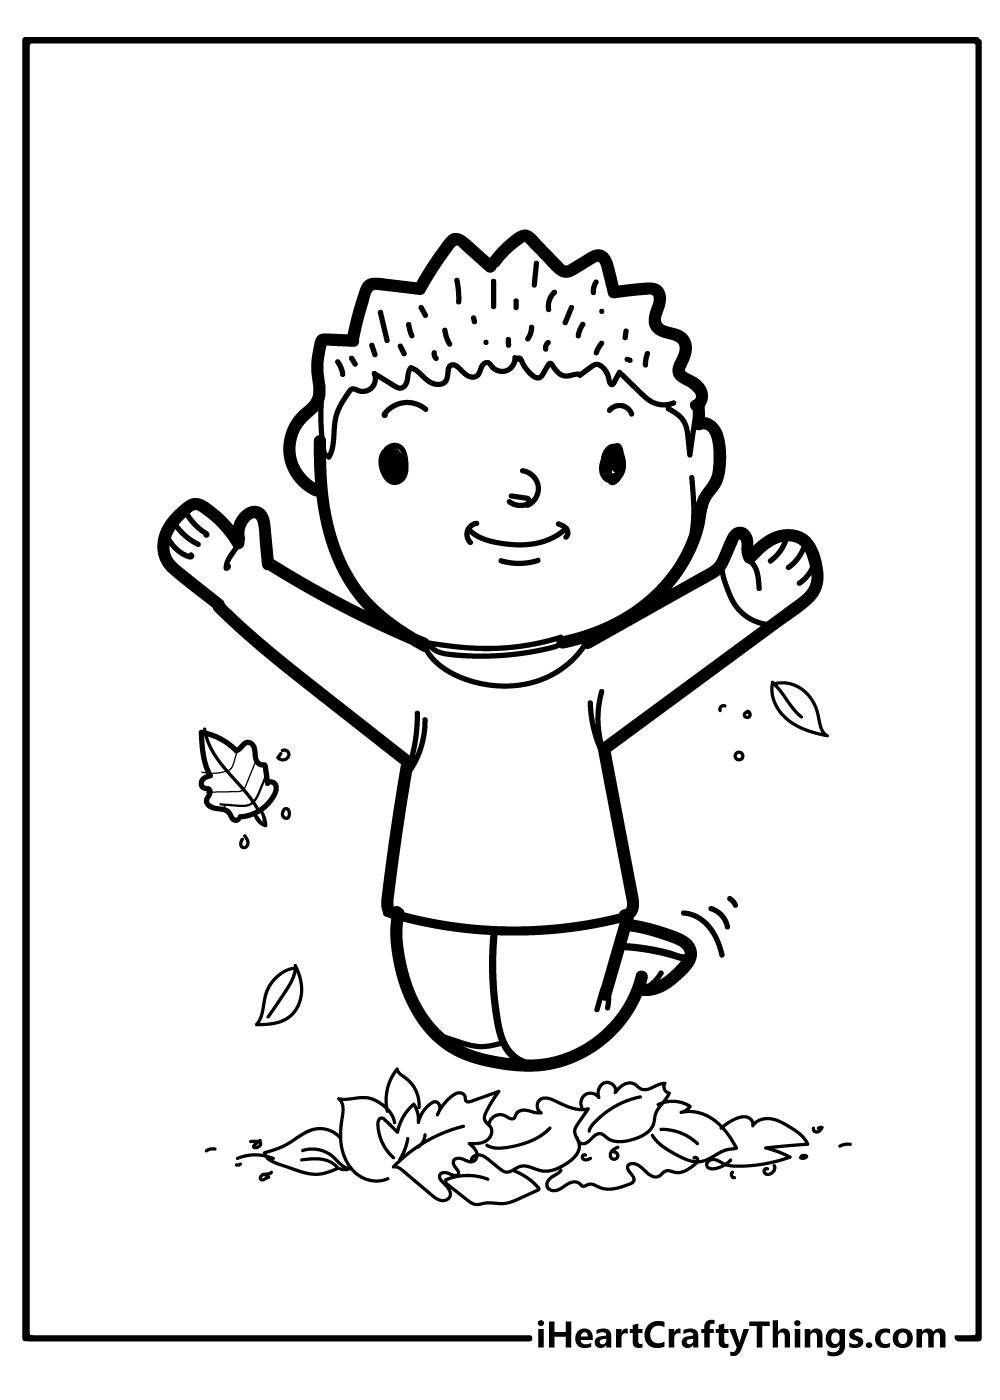 Fall Coloring Pages free pdf download